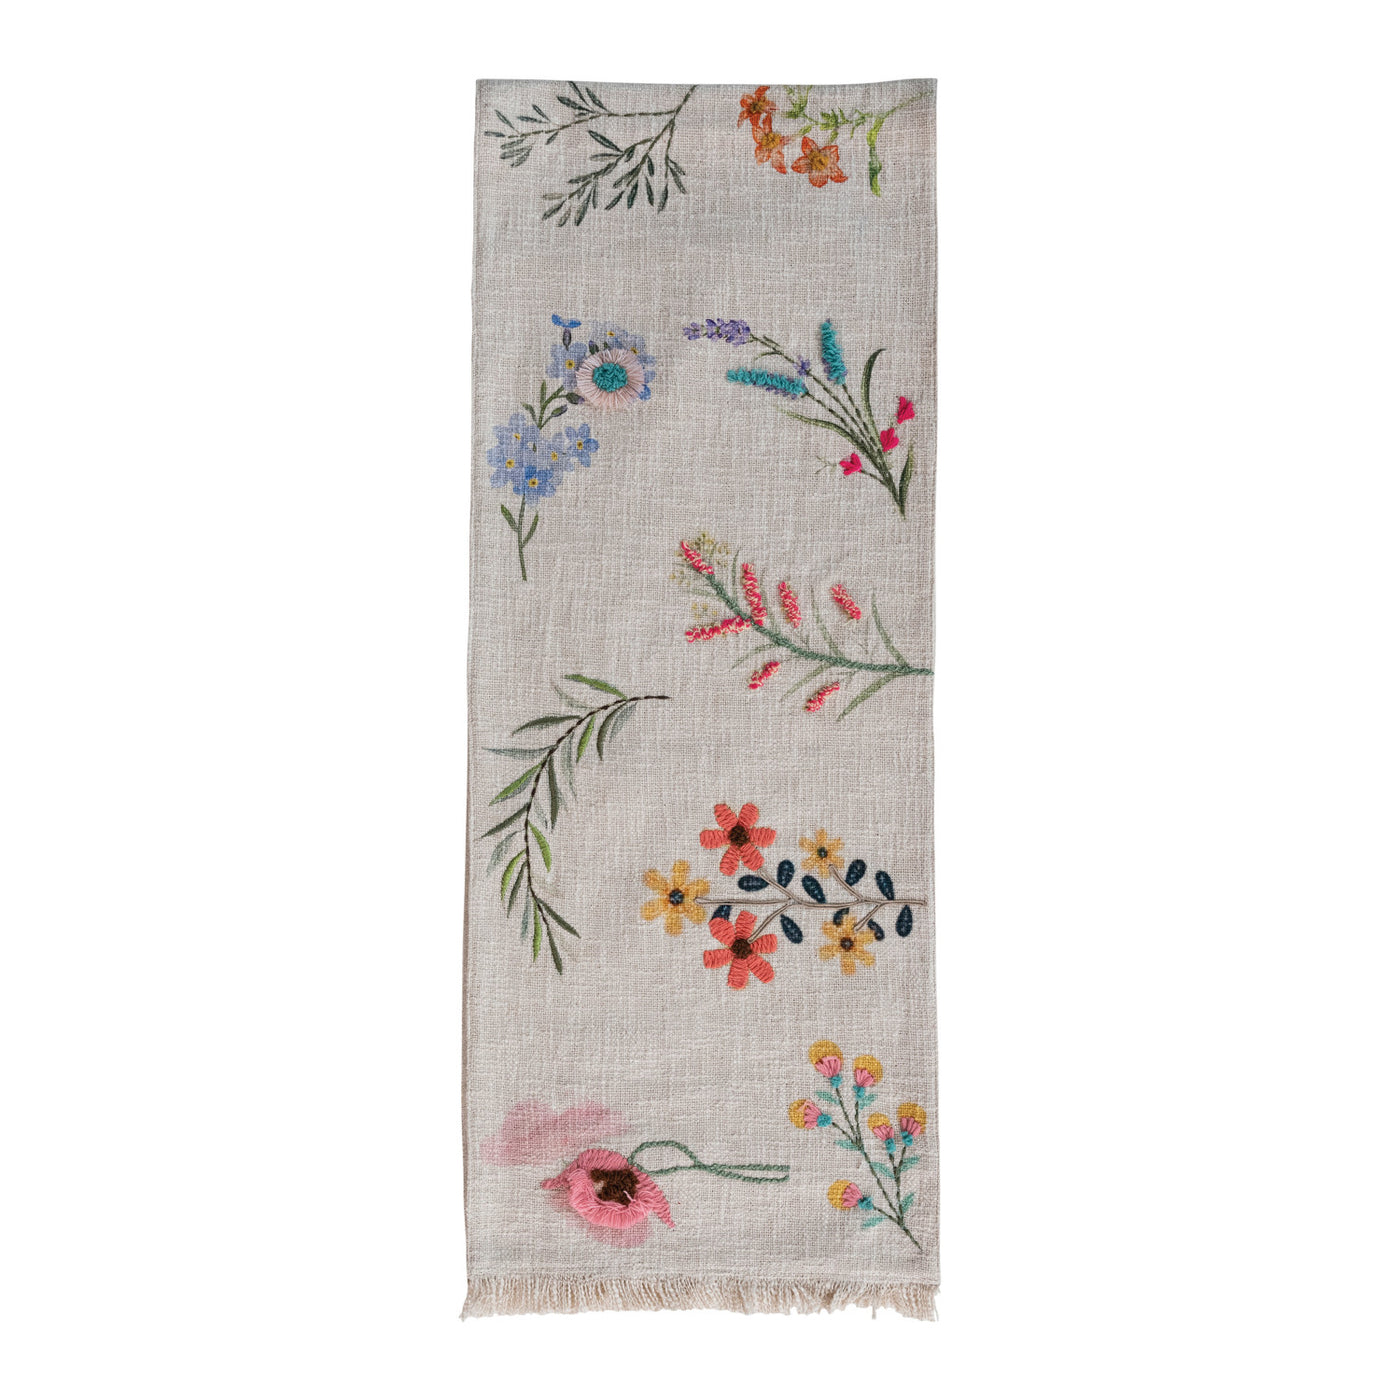 Embroidered Cotton Slub Printed Table Runner w/ Flowers